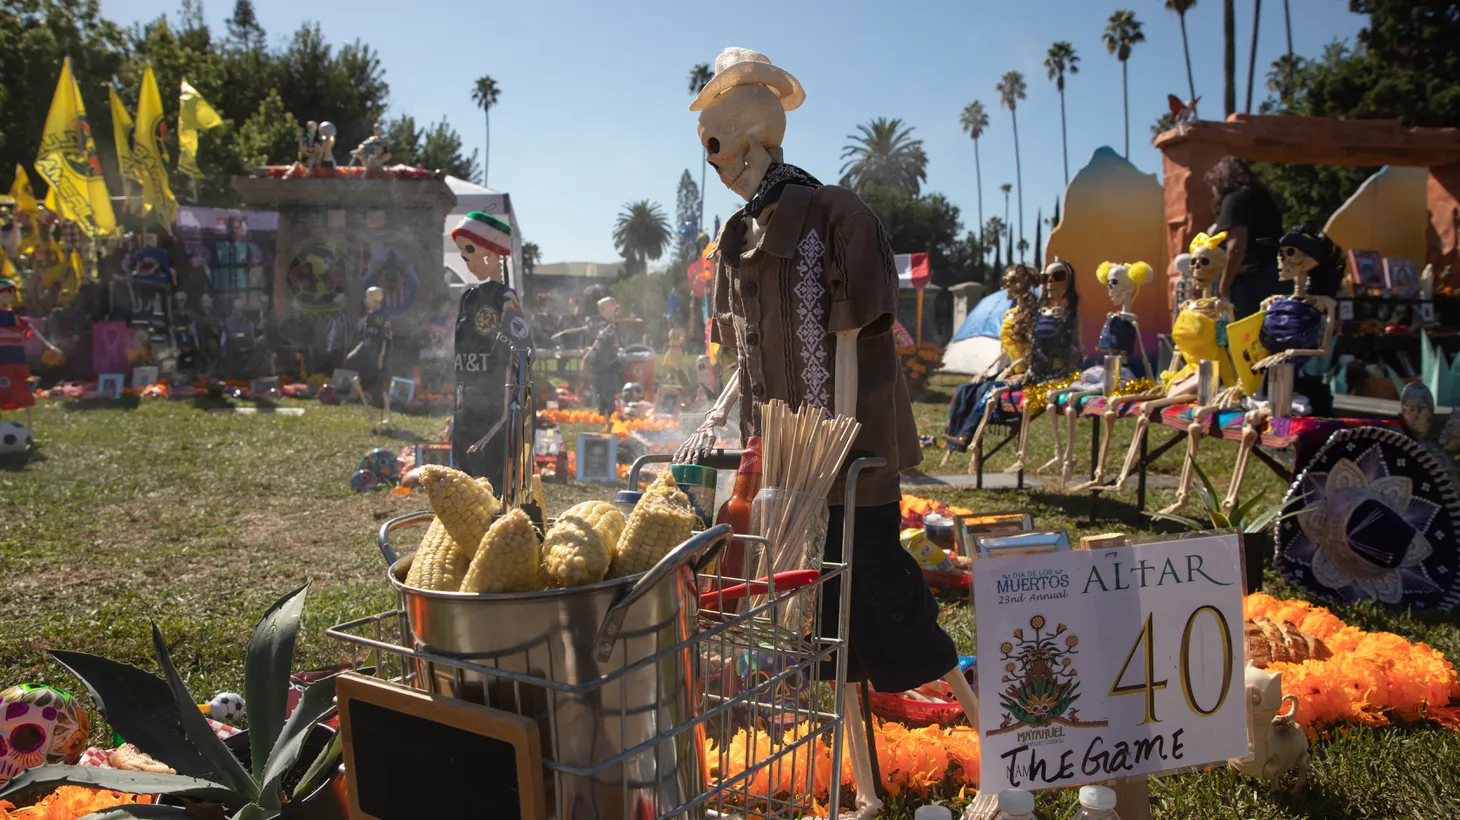 Alfredo Romero’s altar is finished by Saturday, filled with decorative skeletons representing figures like the “corn man” pushing his cart throughout the grounds.